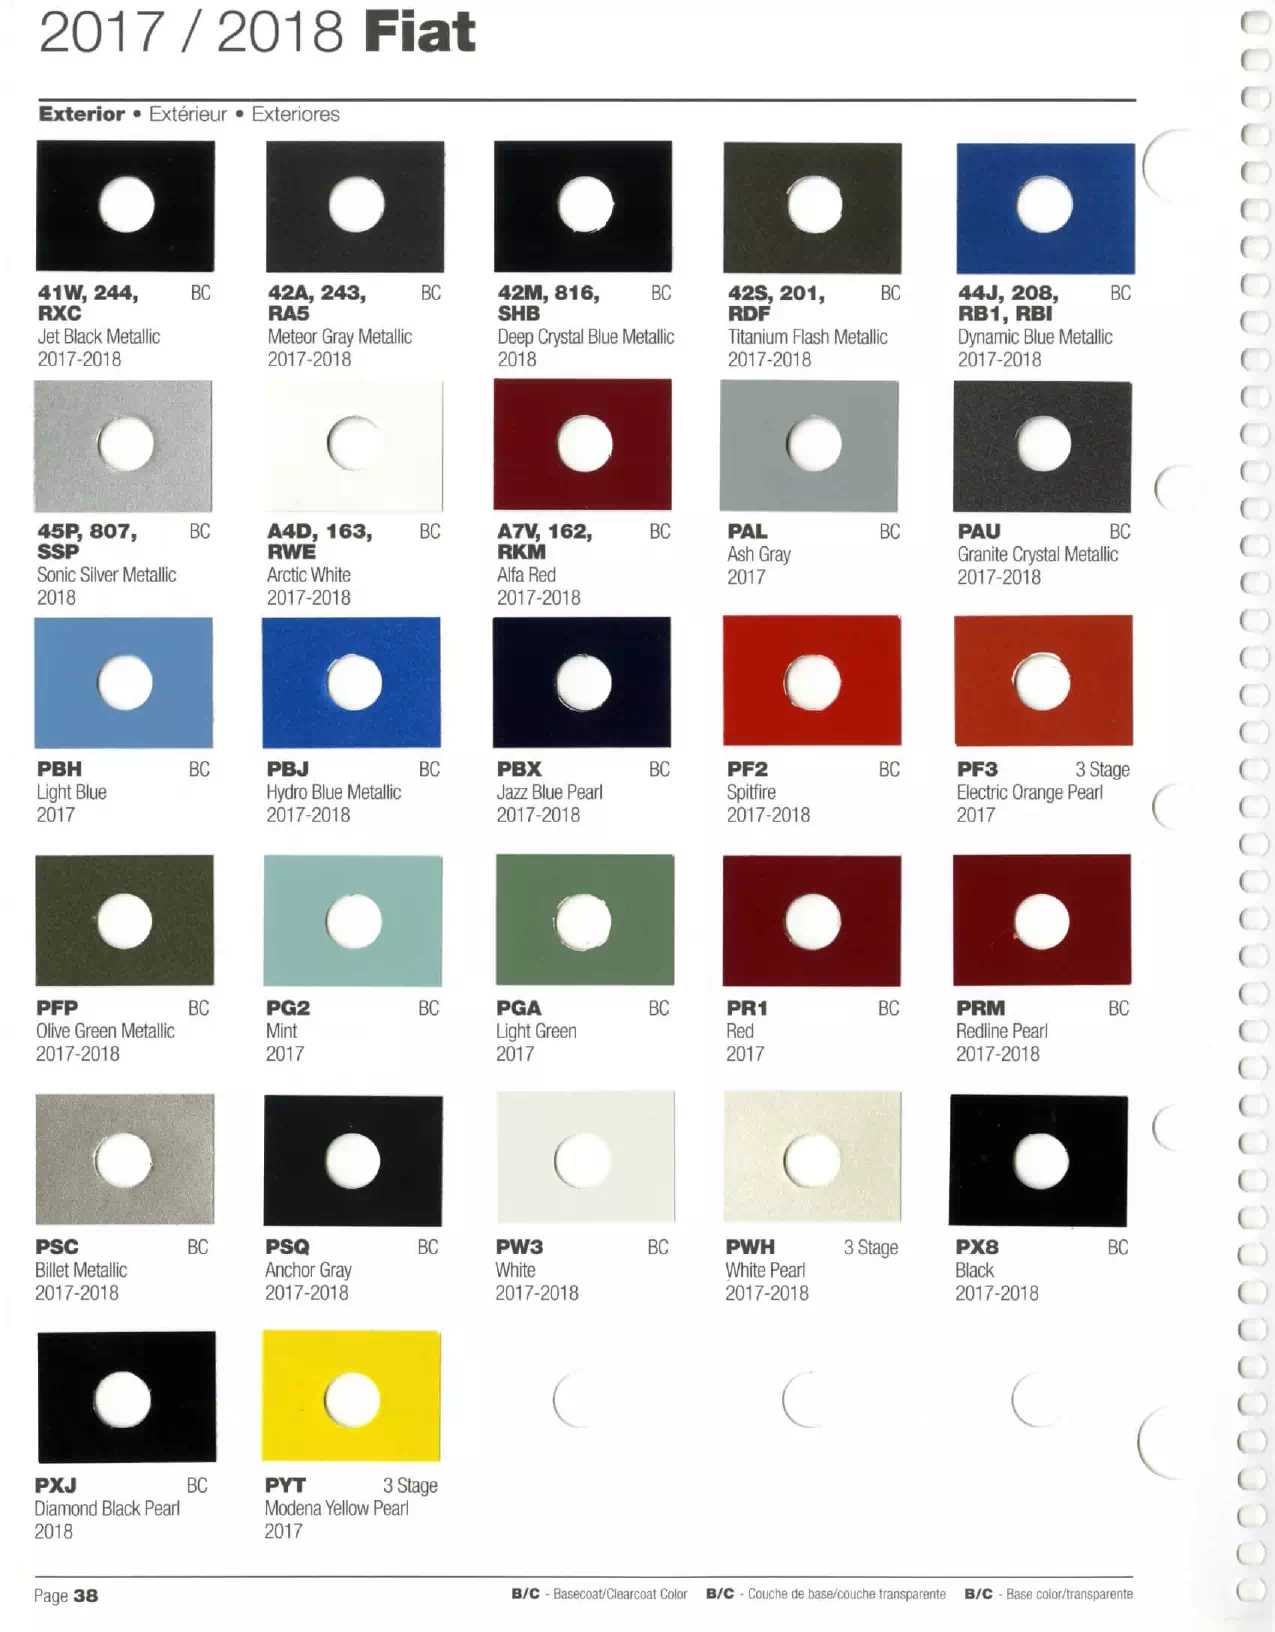 oem paint codes, color charts, and color names along with mixing stock numbers for 2017 fiat colors.